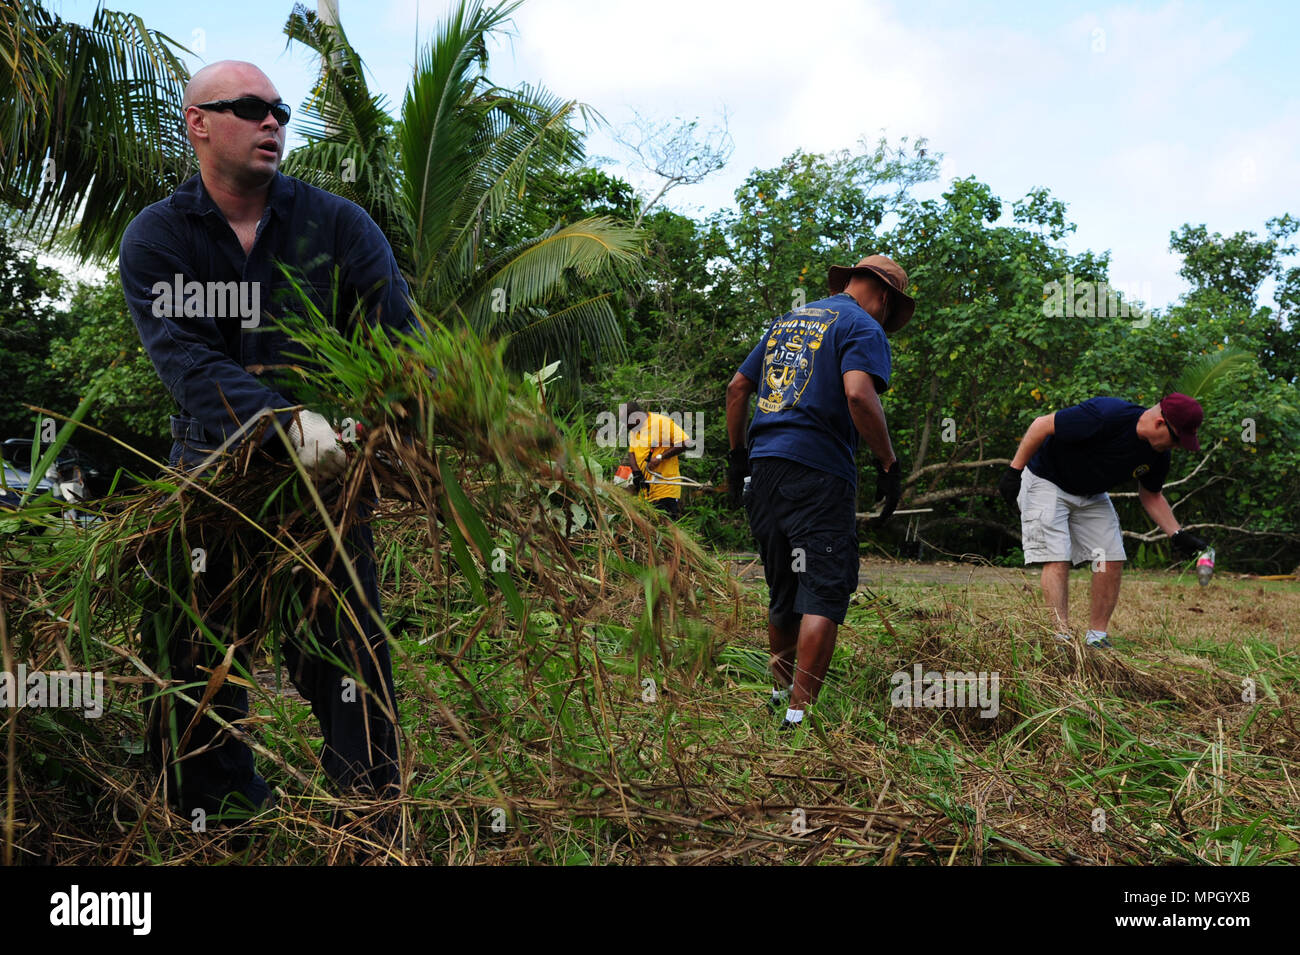 170225-N-WA347-159  PITI, Guam (Feb. 25, 2017) - First class petty officers and chief petty officers, assigned to the submarine tender USS Frank Cable (AS 40), clean up around the Atantano Shrine in Piti, Guam Feb. 25, during a CPO 365 community relations project.  Frank Cable is forward deployed to the island of Guam and conducts maintenance and support of submarines and surface vessels deployed to the U.S. 5th and 7th Fleet area of operations.  (U.S. Navy photo by Mass Communication Specialist 1st Class Eva-Marie Ramsaran/Released) Stock Photo